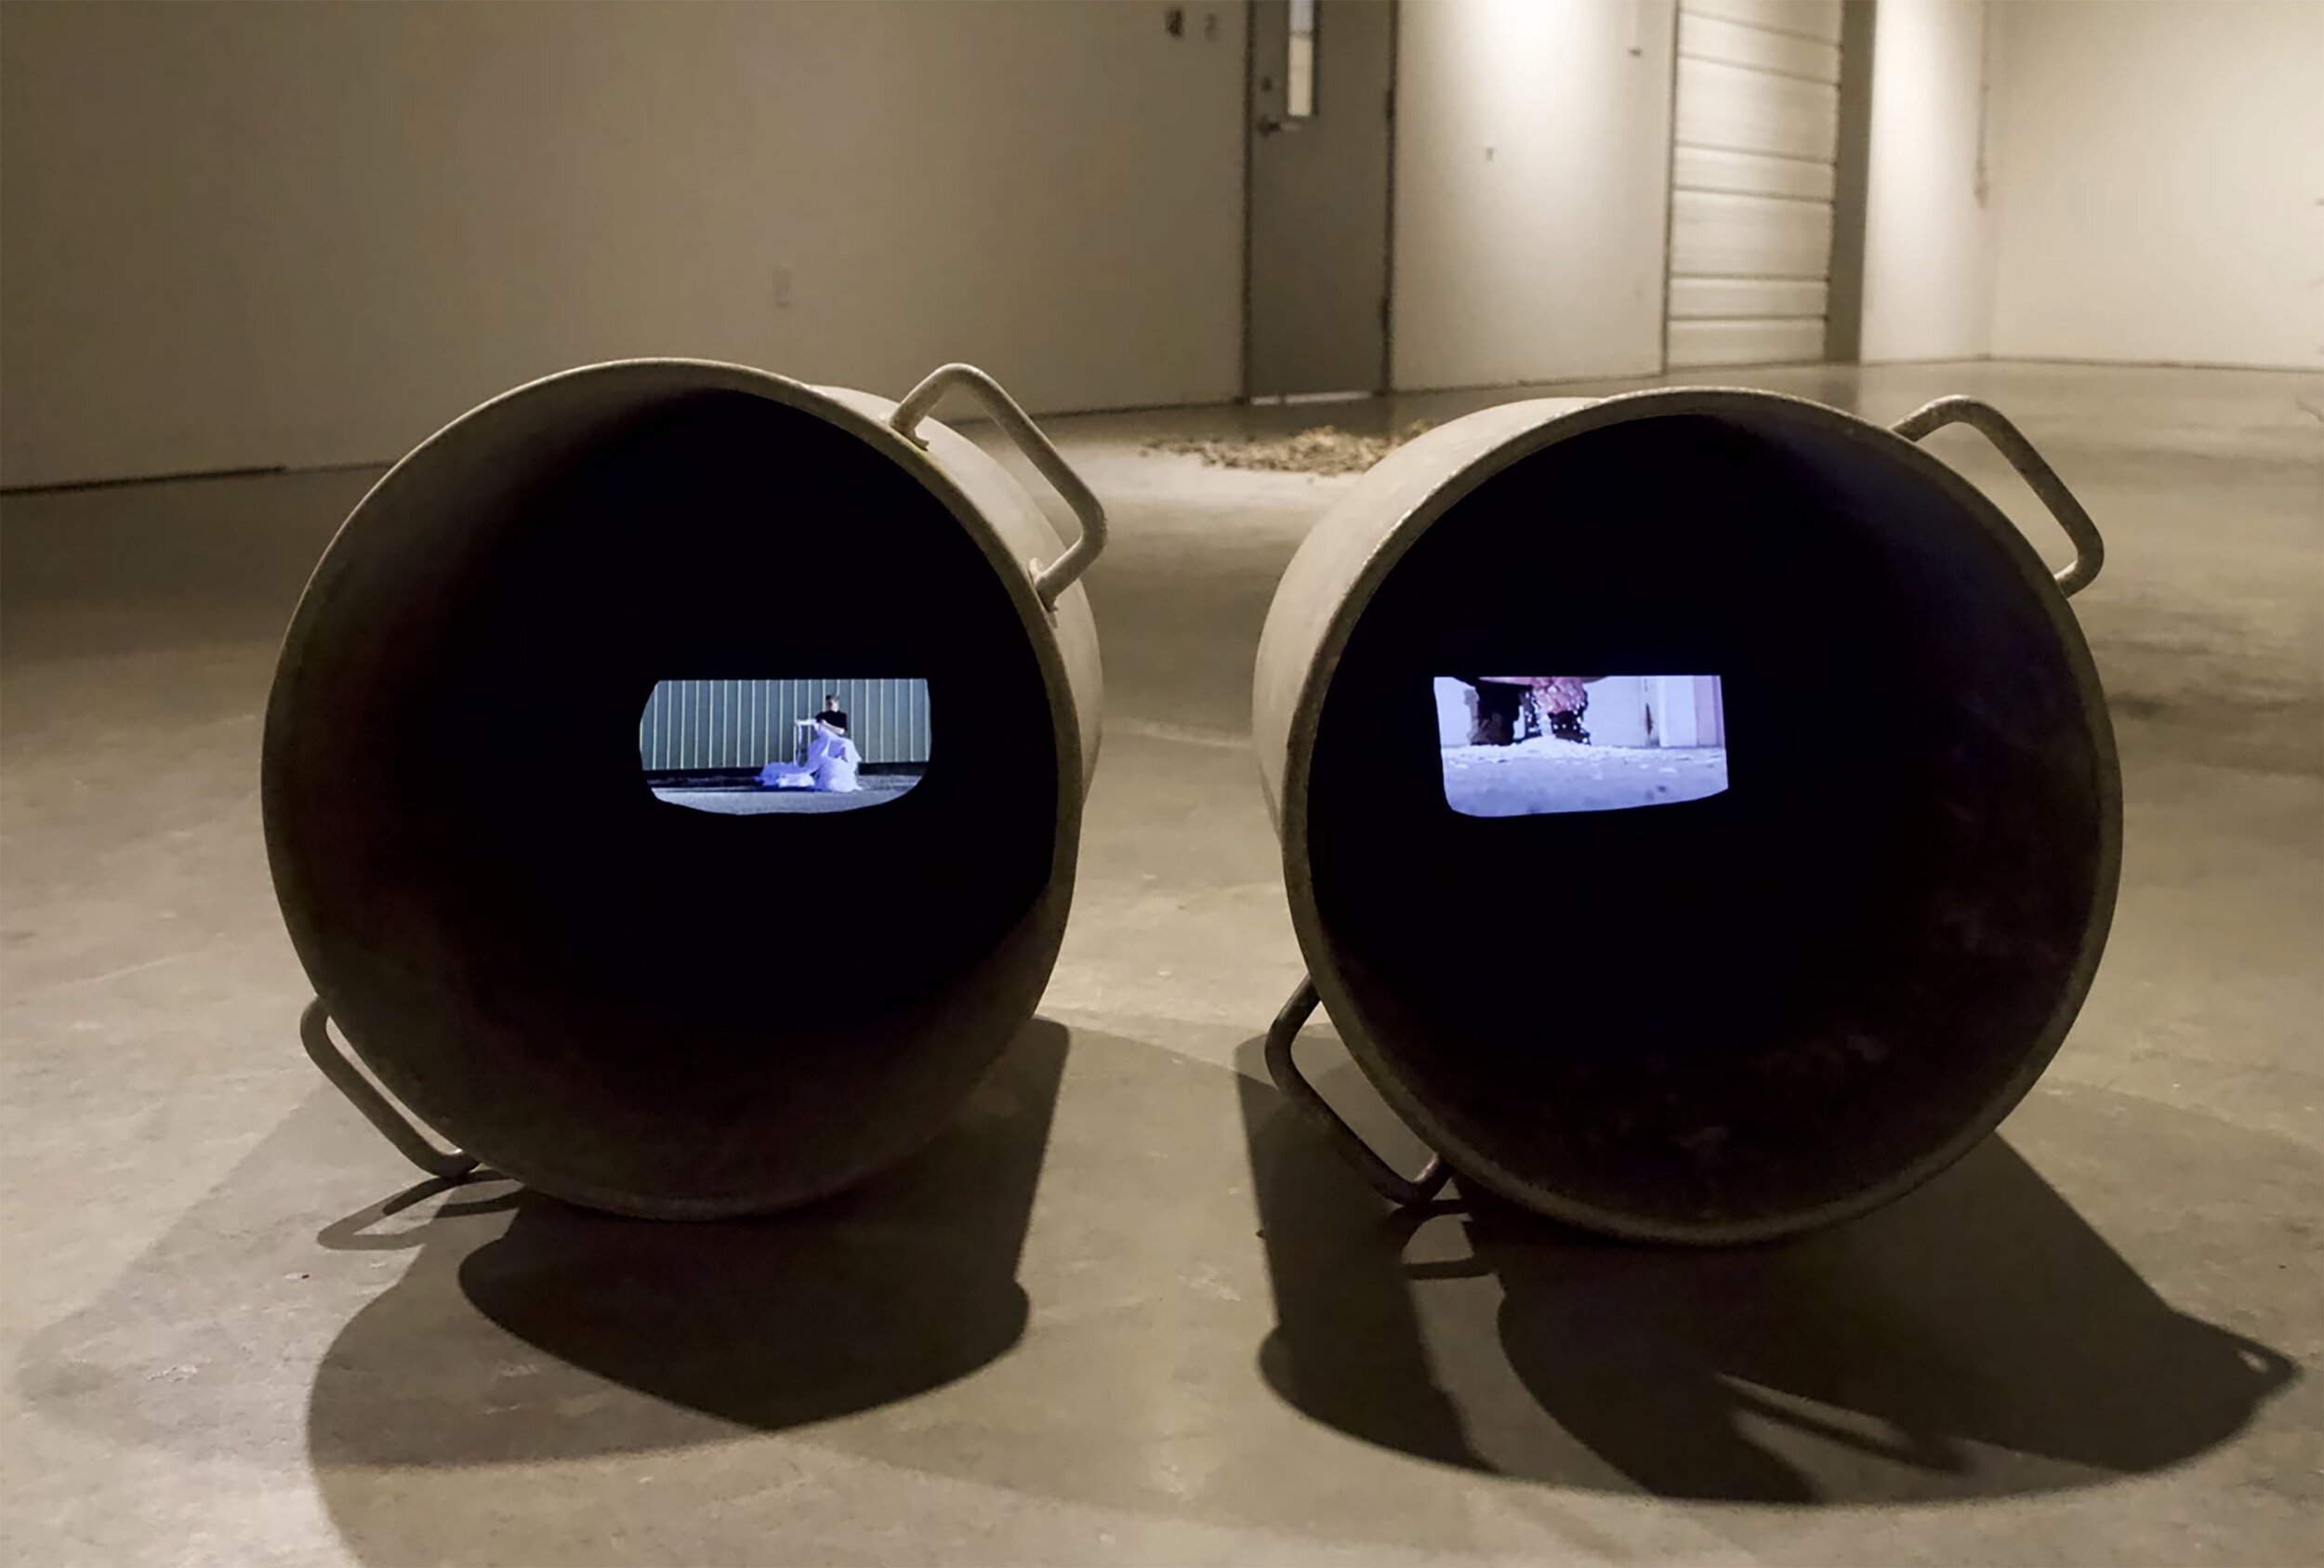  Rachel Lindsay-Snow,  When my shadow overlaps your shadow Who is the new one? , Installation (Twin pots, paper, video: performer, eggshells, fabric), 2019.  Notes: There are twin pots, each containing a video (sound on): one of a figure tearing whit